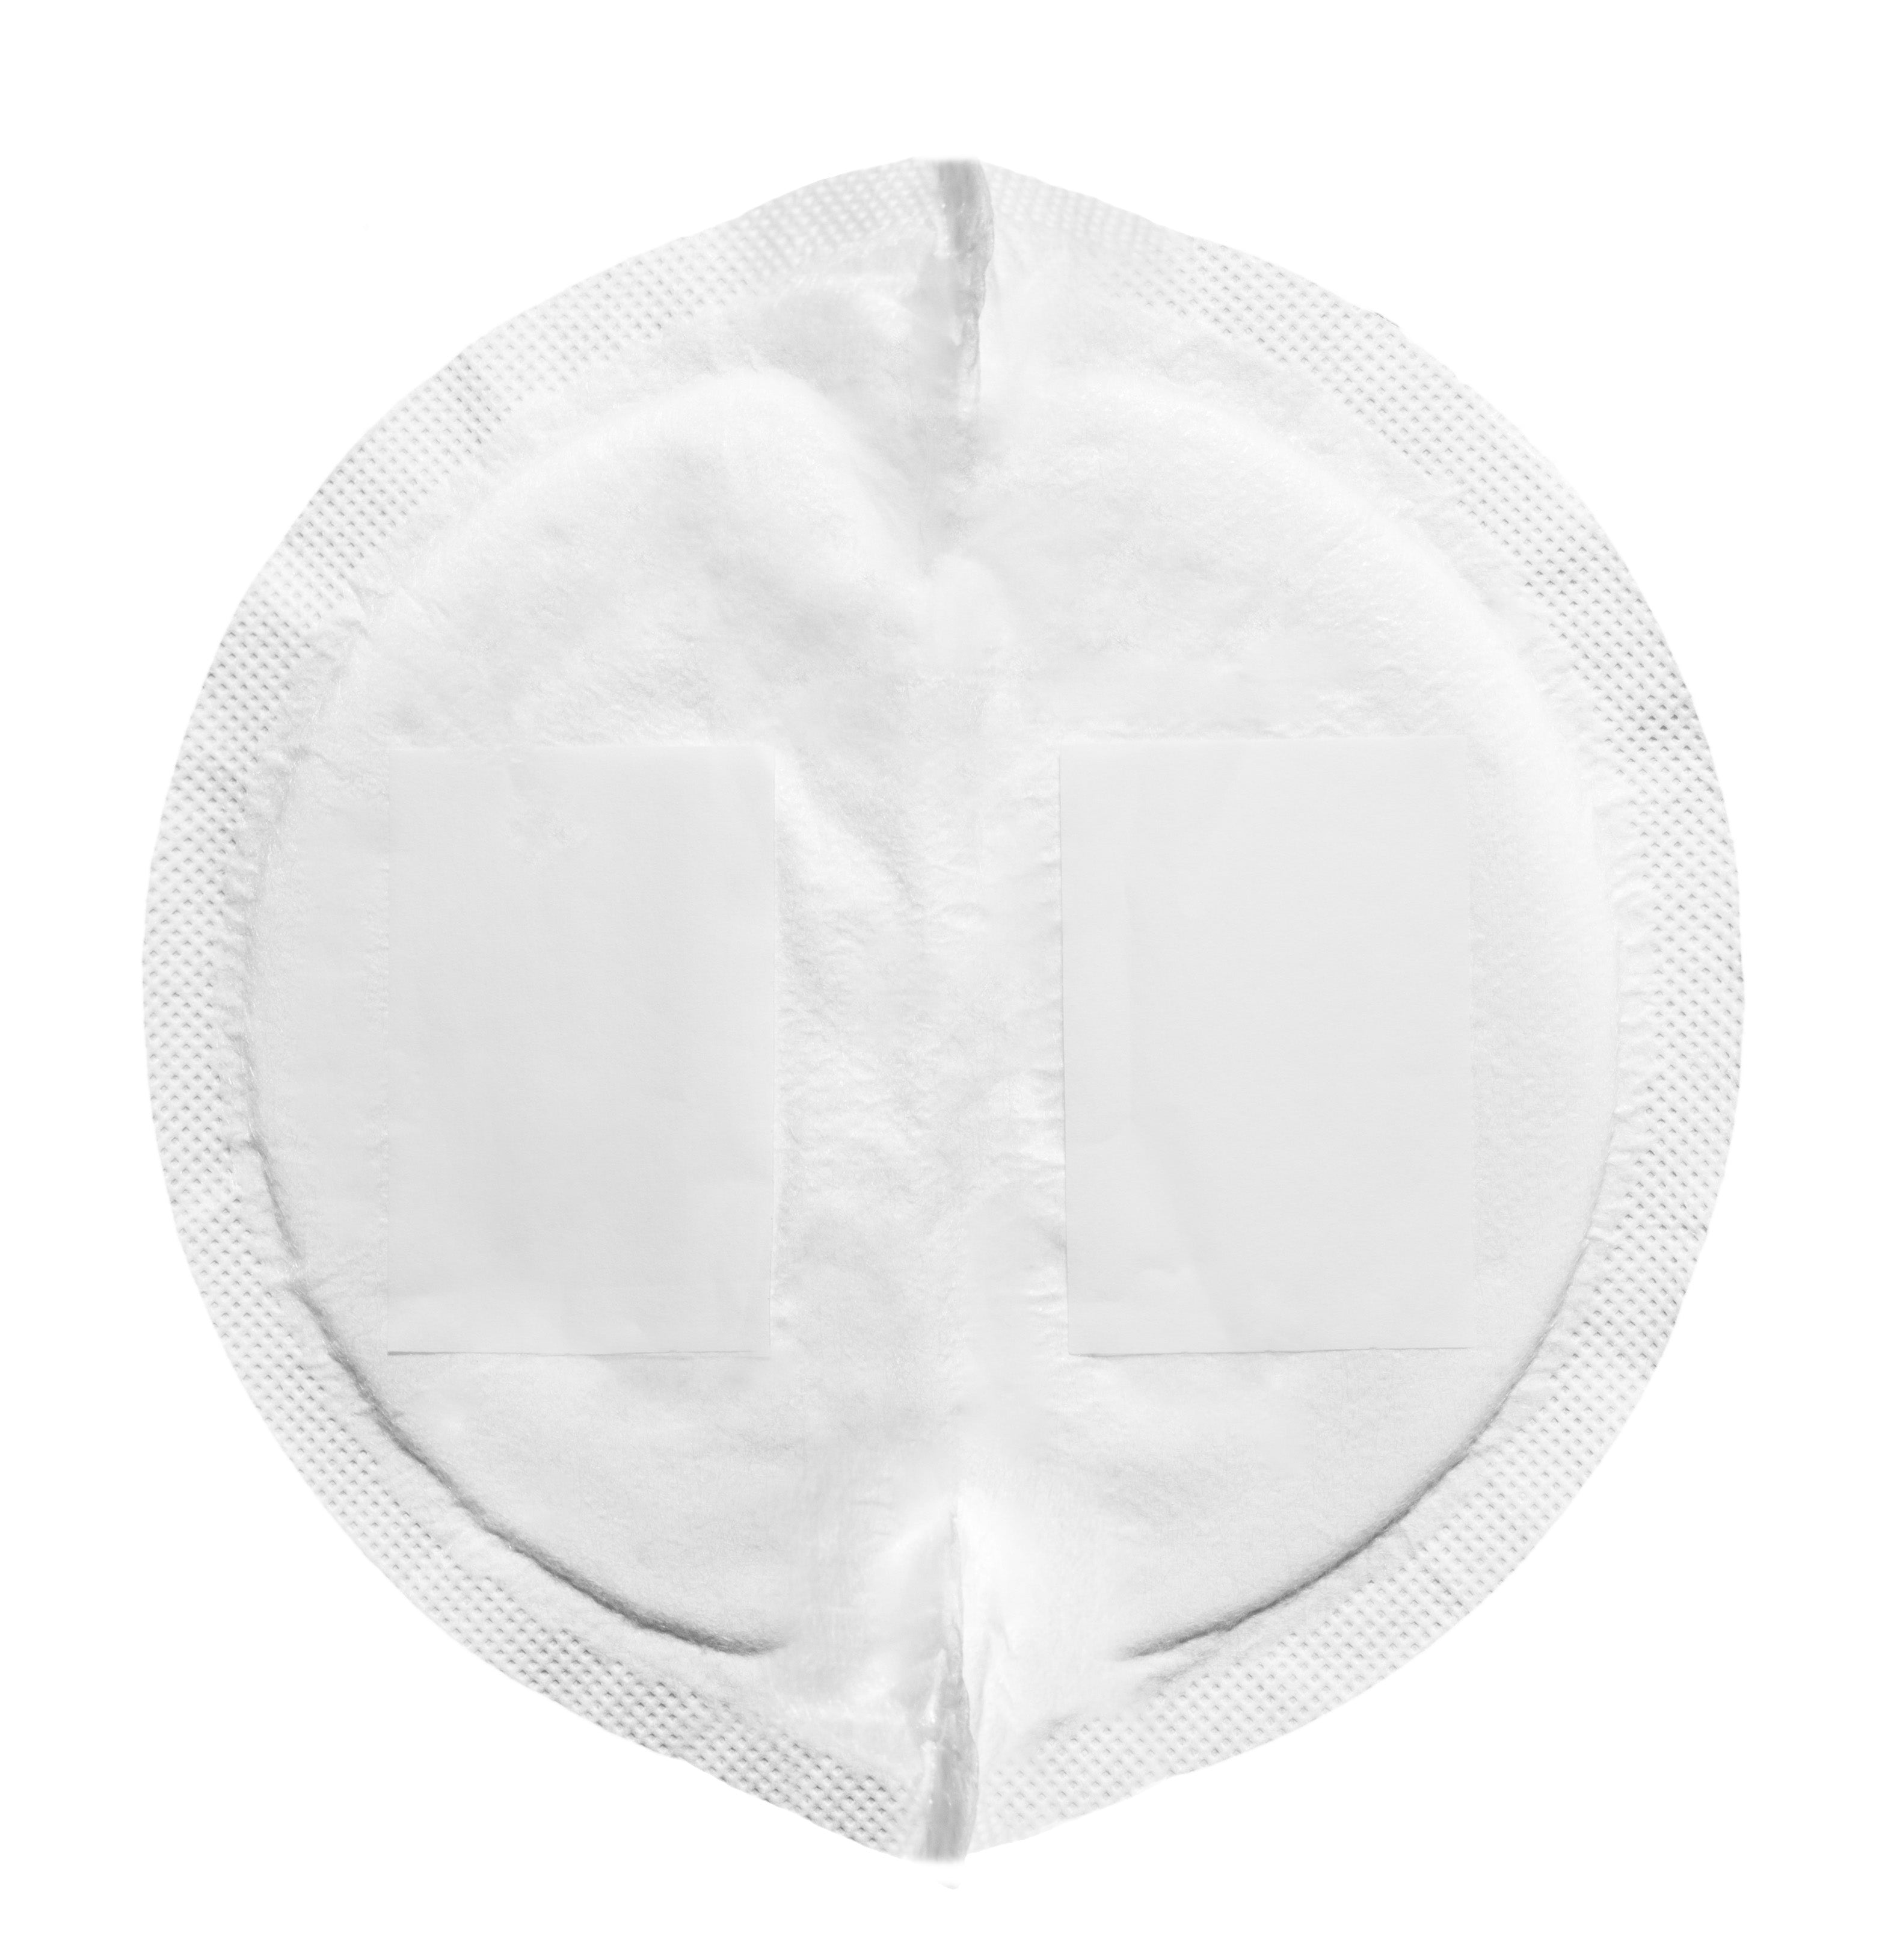  TL Care Nursing Pads Made with Organic Cotton